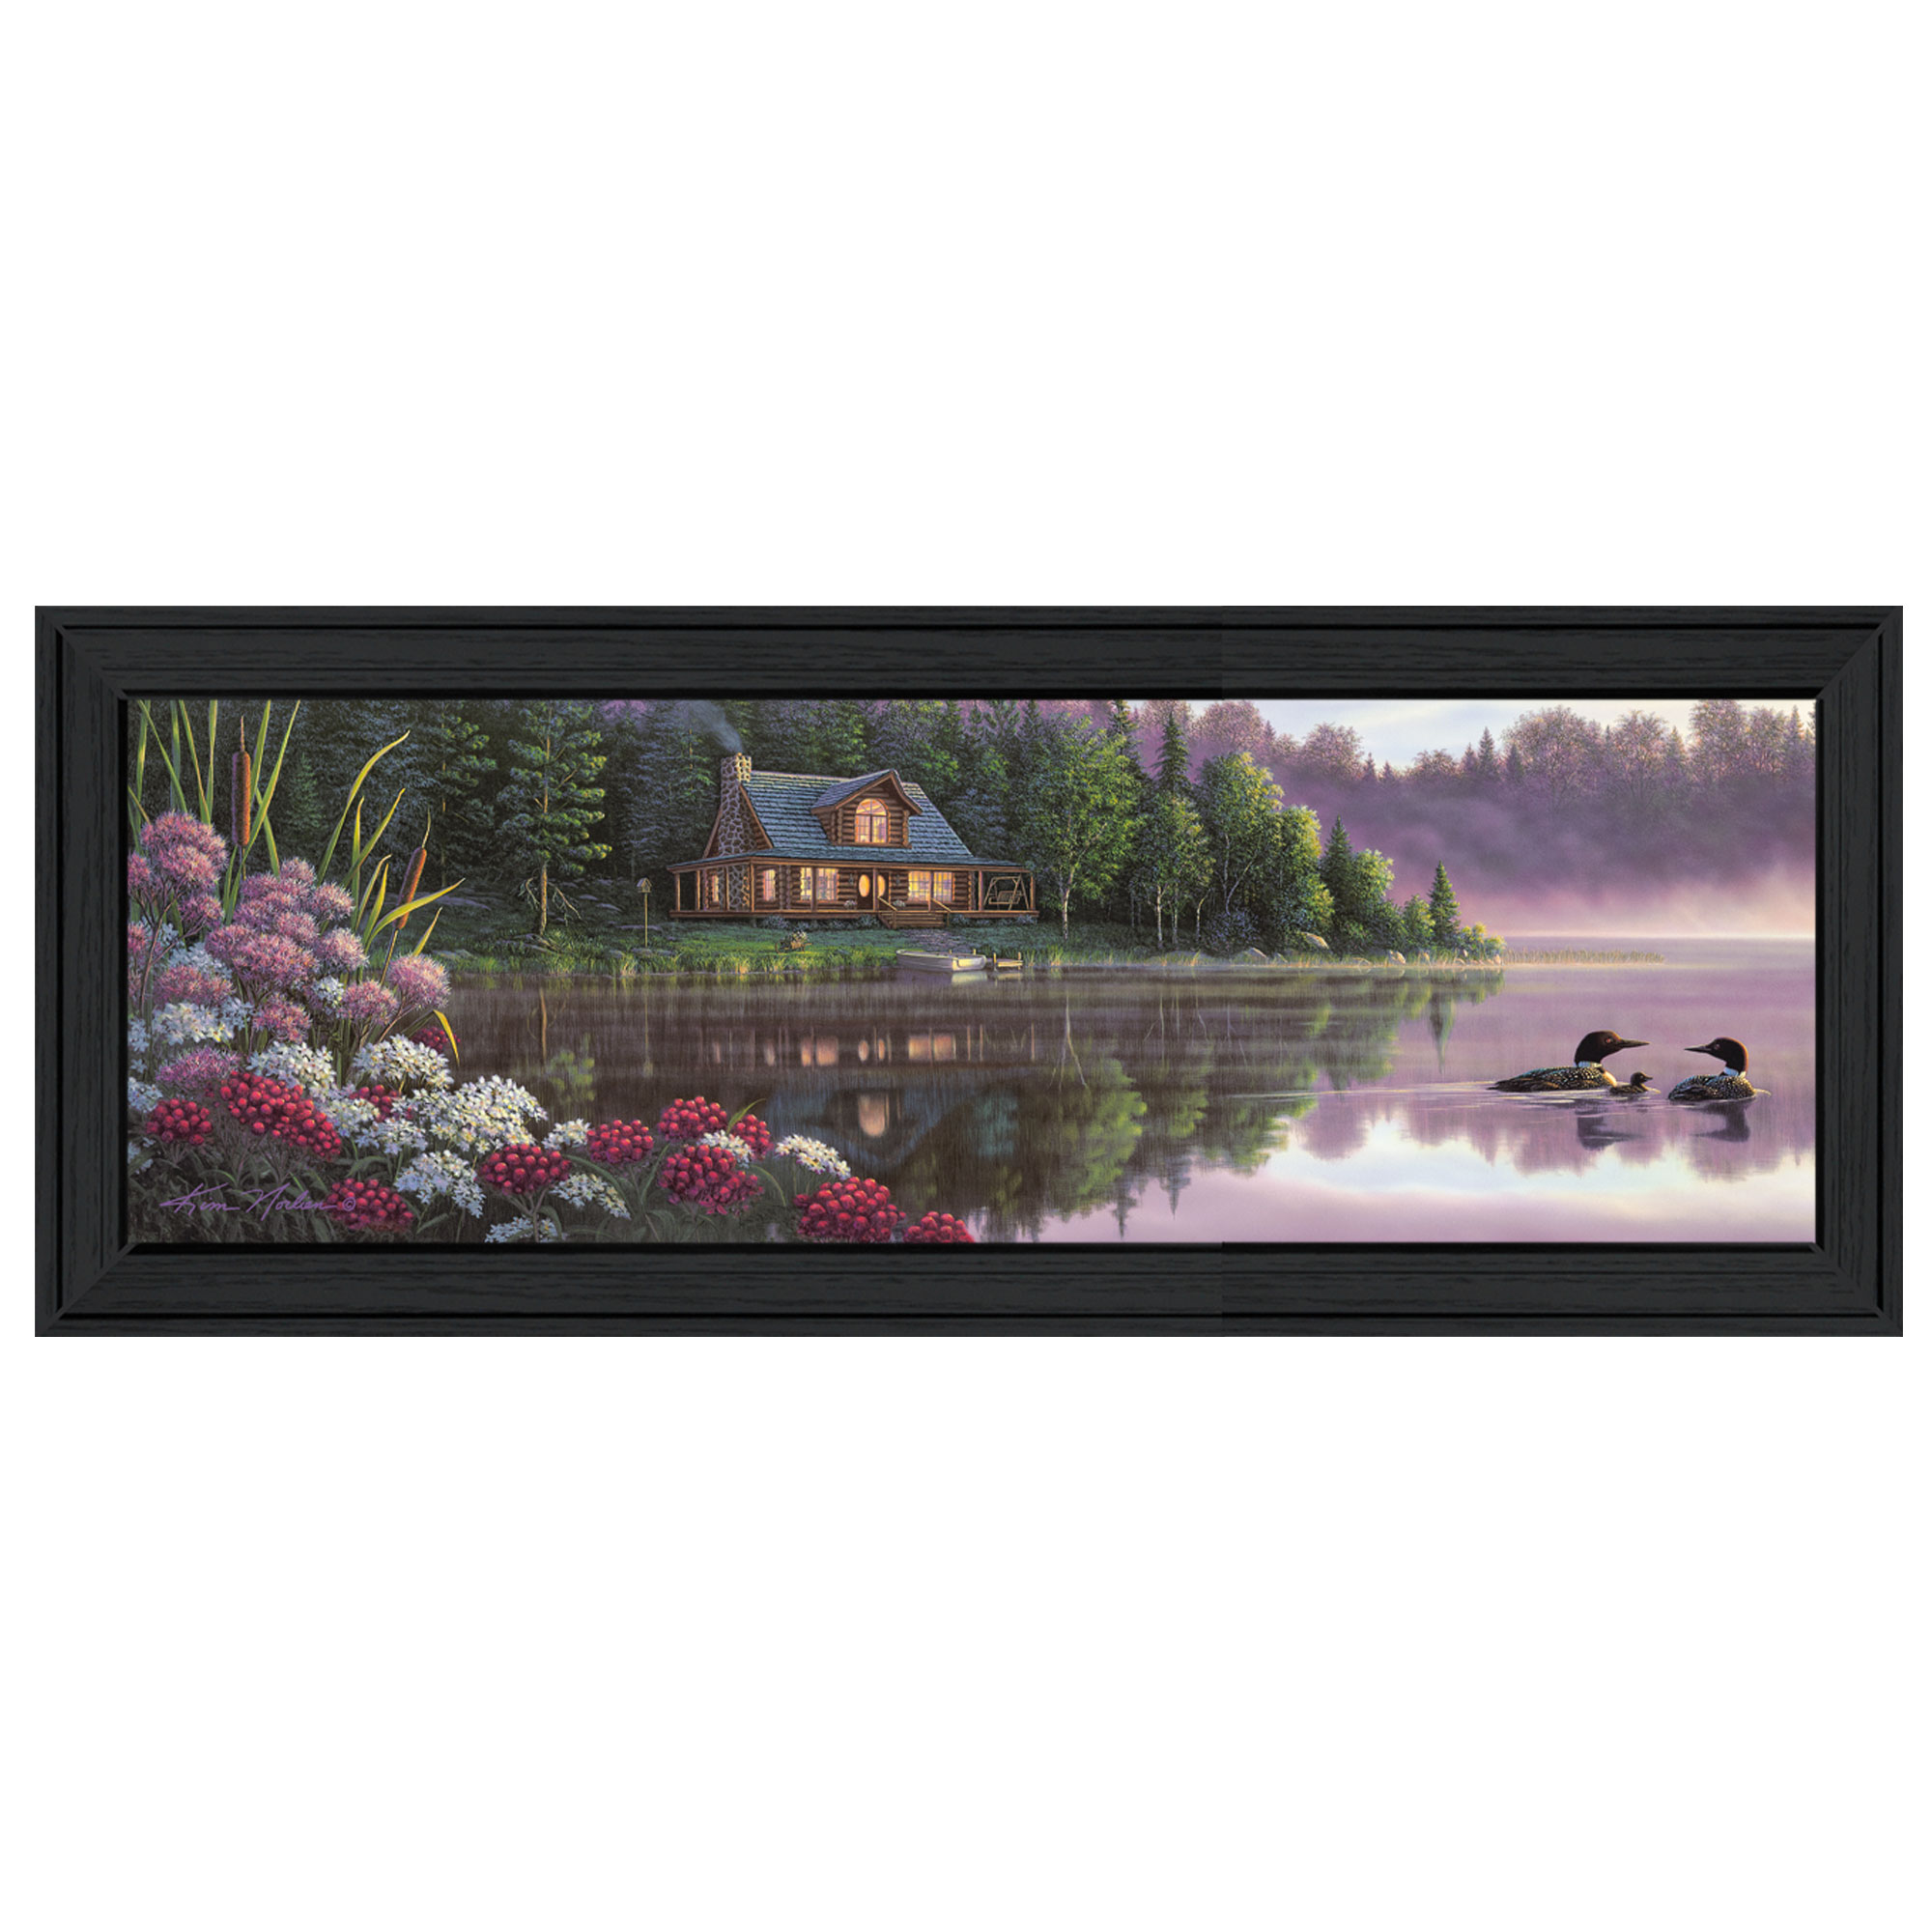 "Beside Still Waters" By Kim Norlien, Printed Wall Art, Ready To Hang Framed Poster, Black Frame